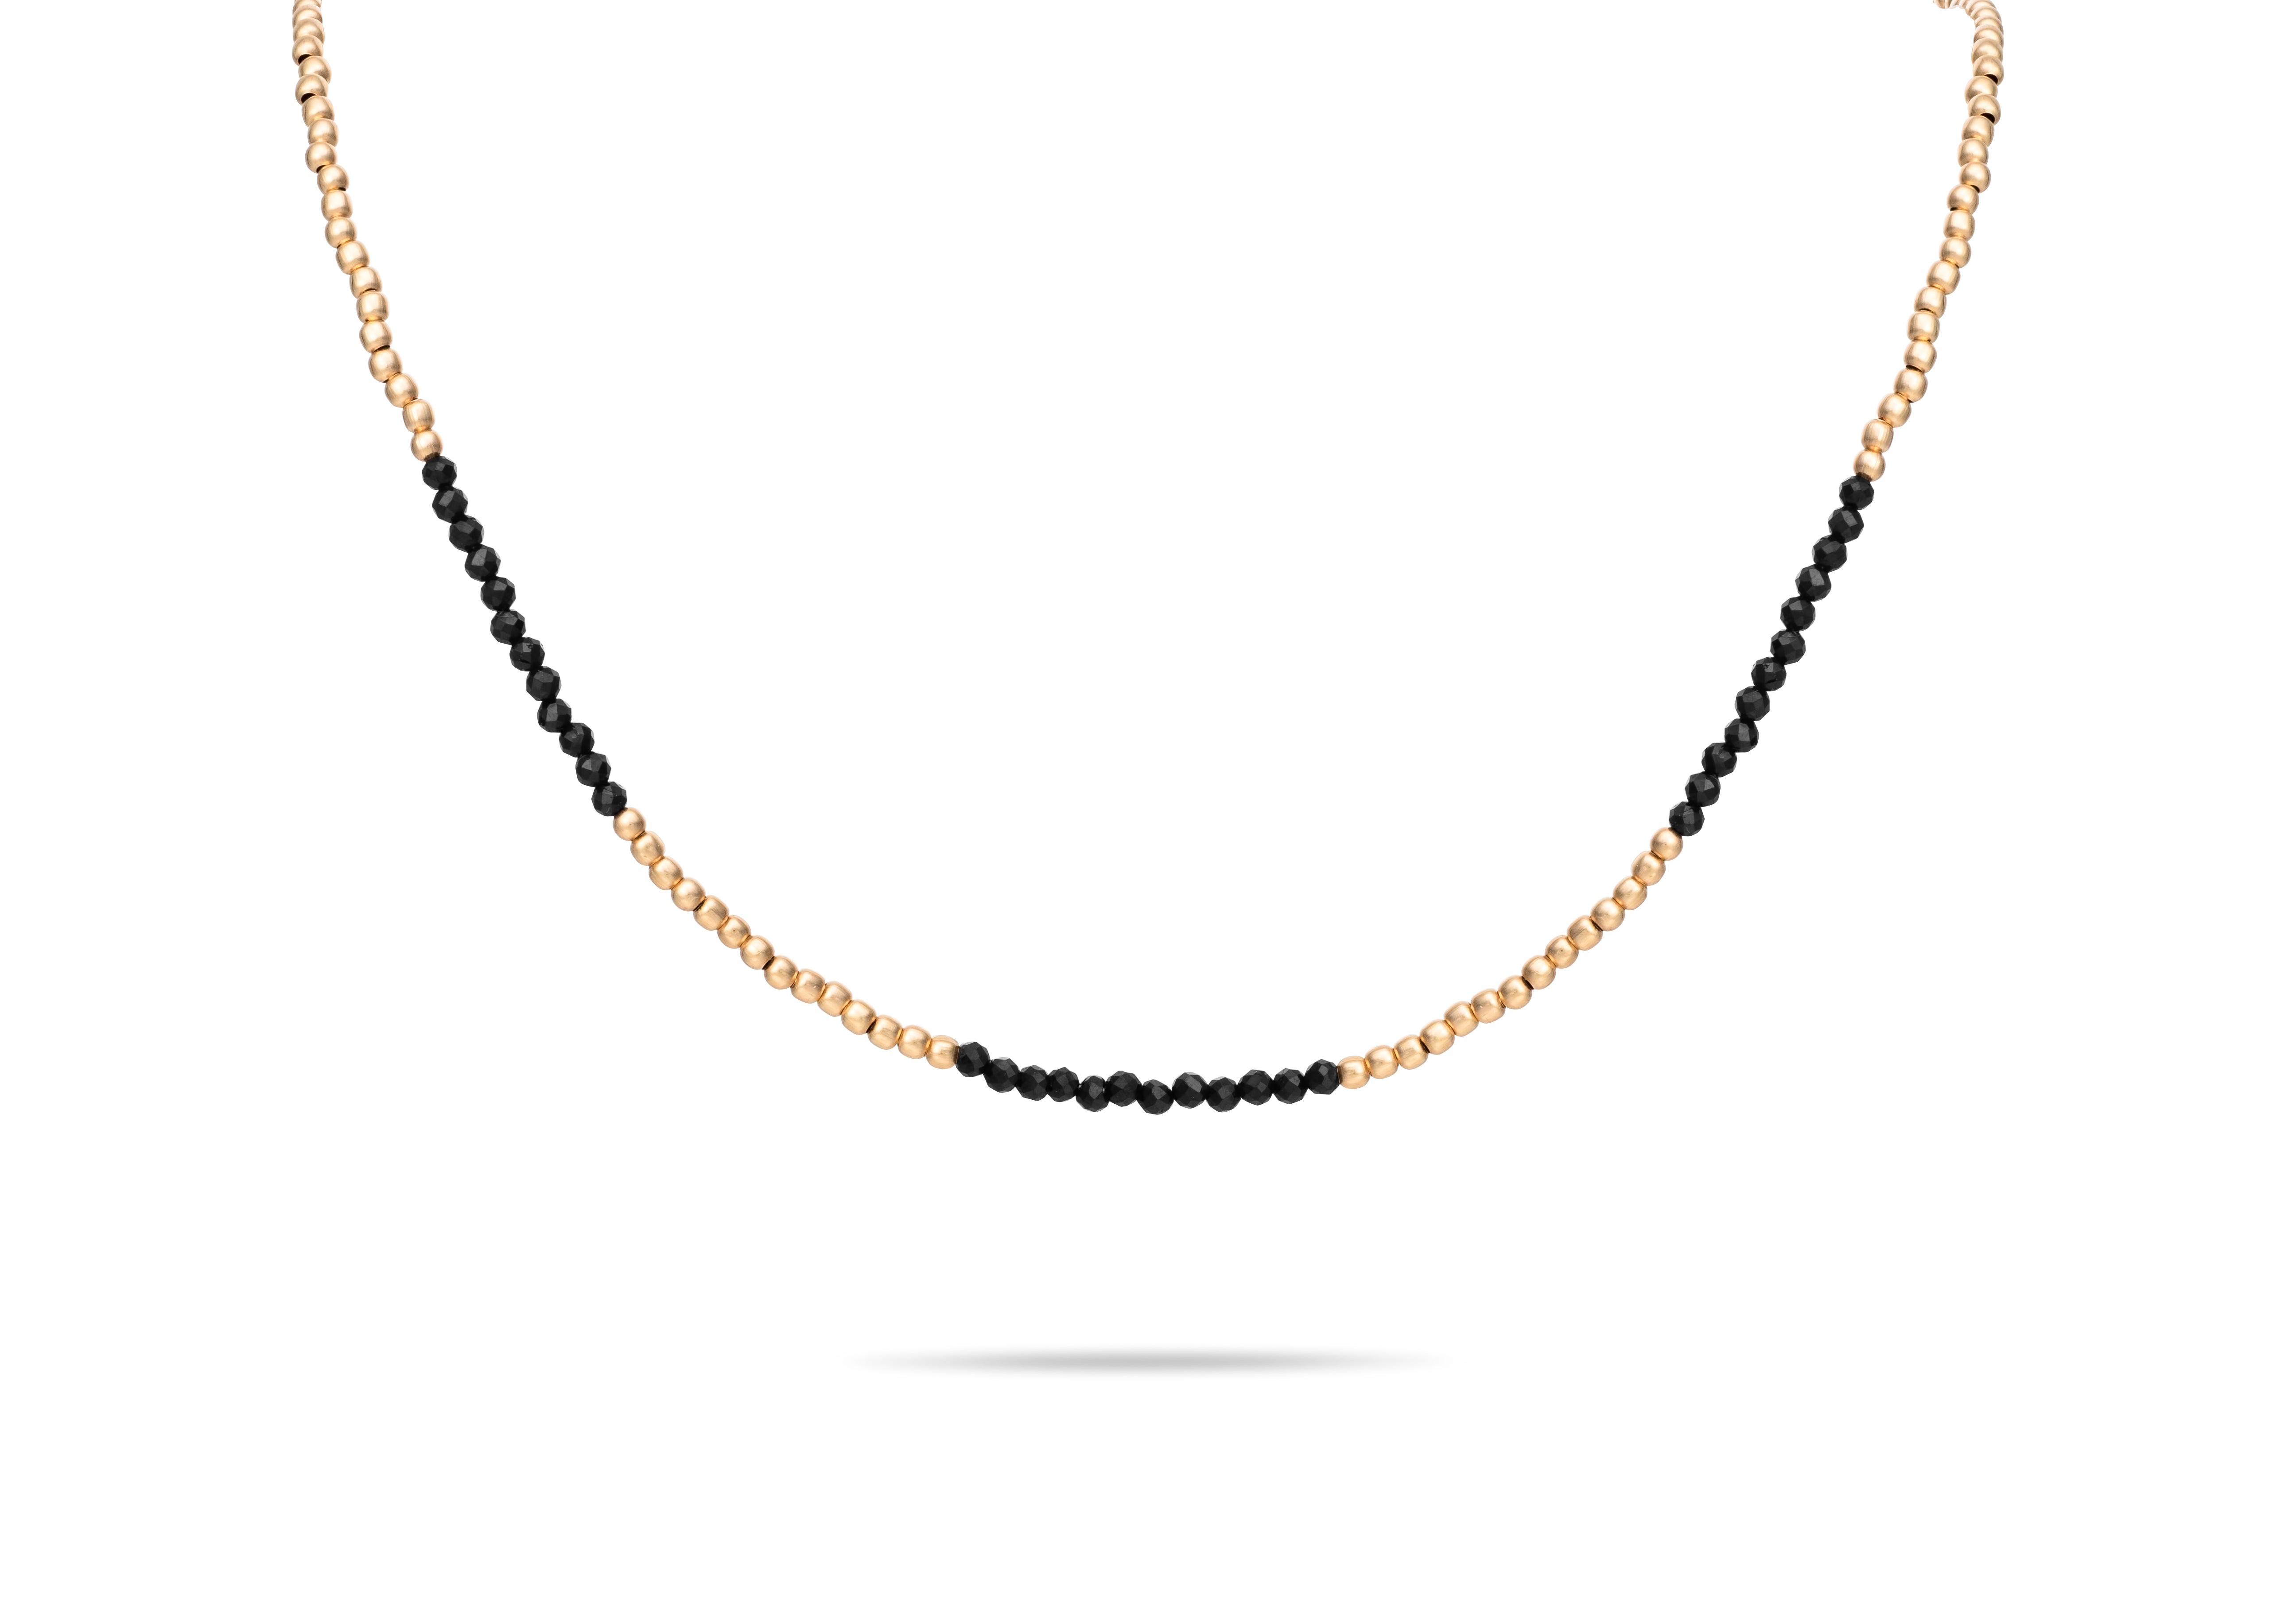 Mini Gold Bead and Black Spinel Necklace